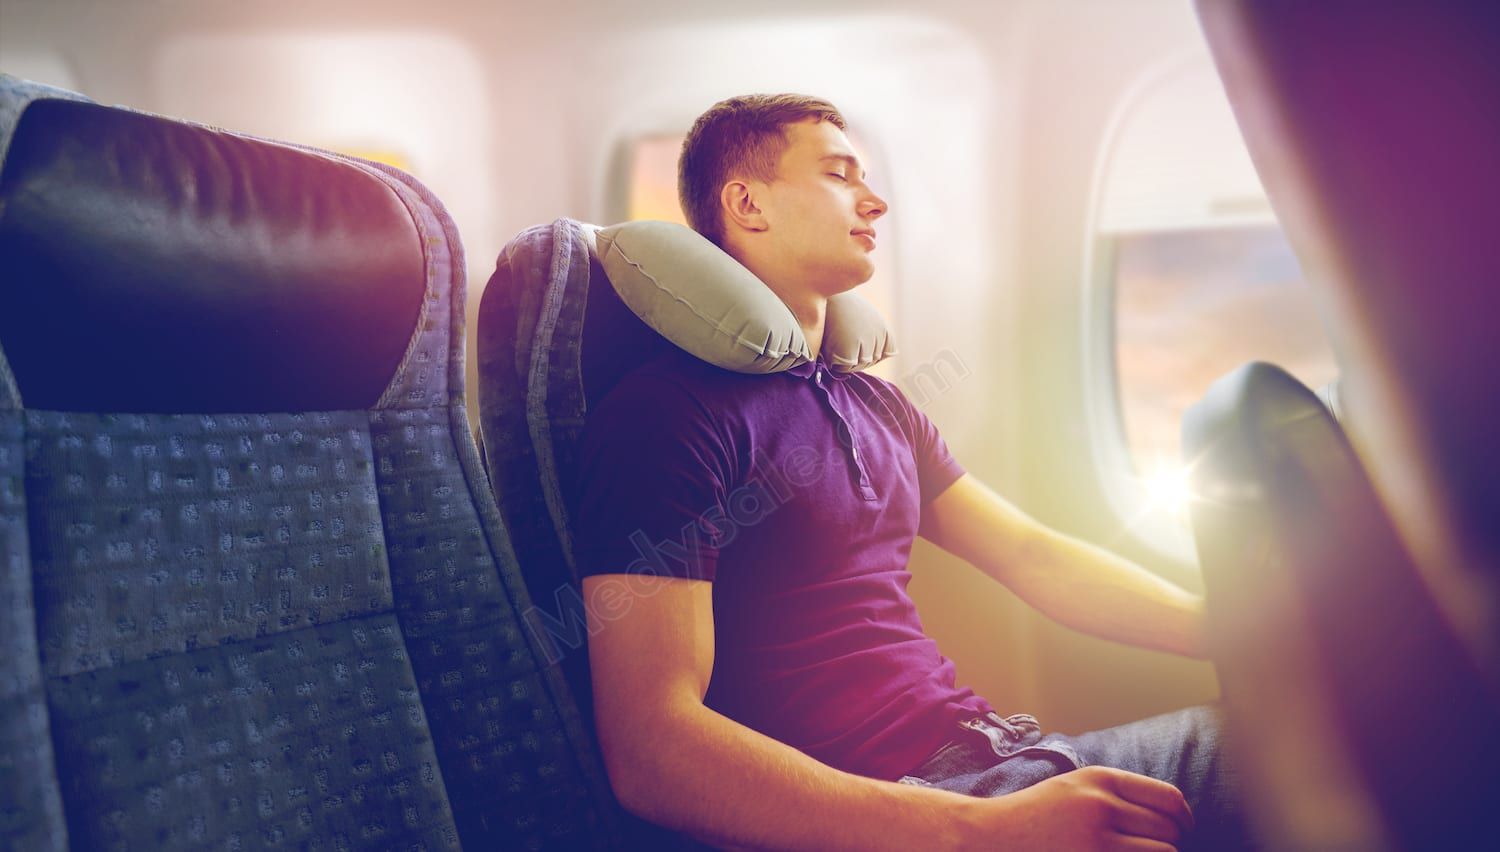 Travel Can Have An Impact On Sleep And Work